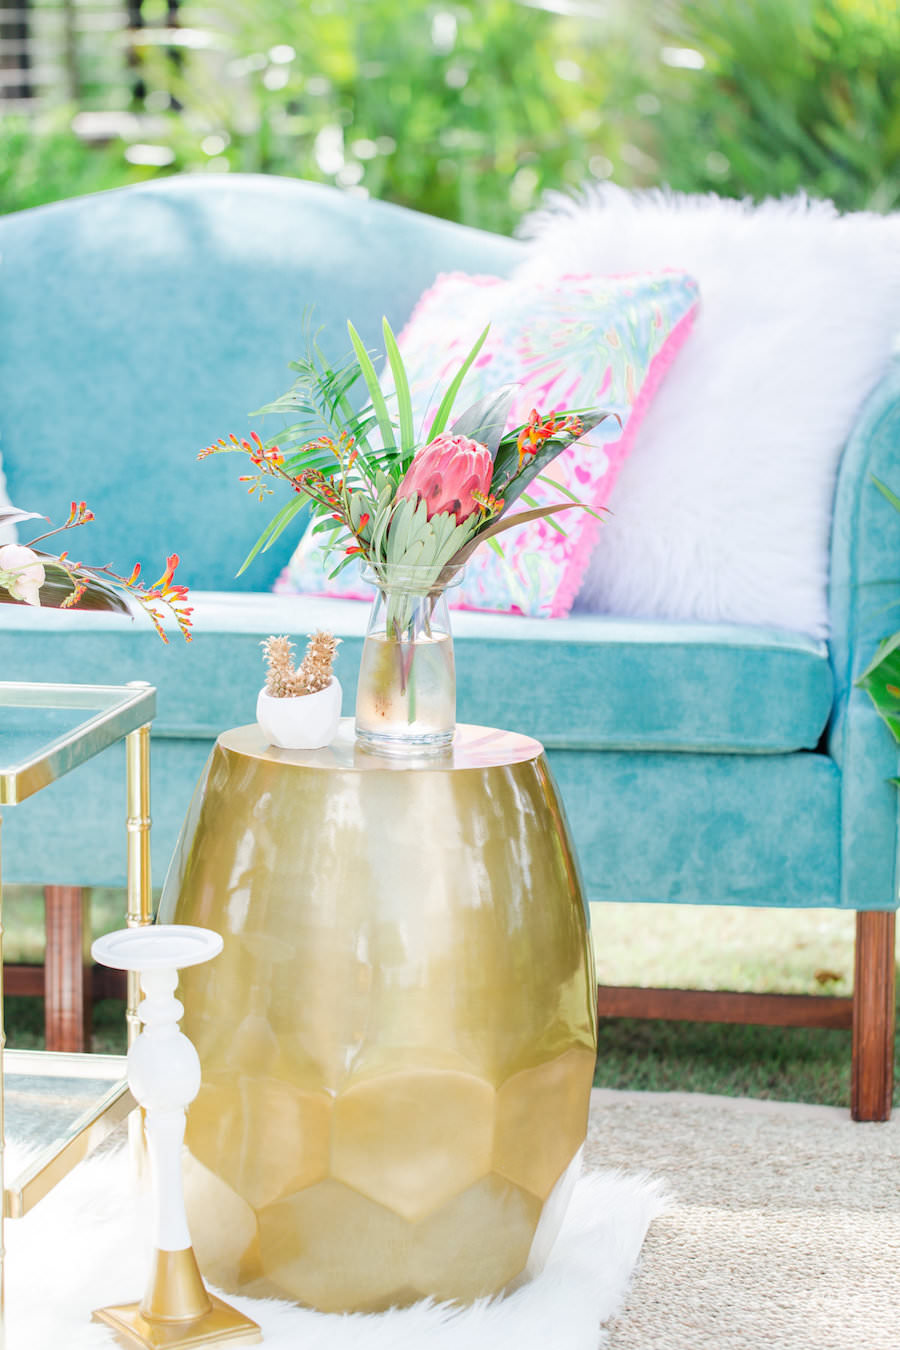 Teal Vintage Couch Wedding Seating Ideas and Inspiration with Eclectic End Tables and Tropical Wedding Centerpieces with Lilly Pulitzer Accents | Tampa Bay Vintage Wedding Rental Furniture The Reserve Vintage Rentals